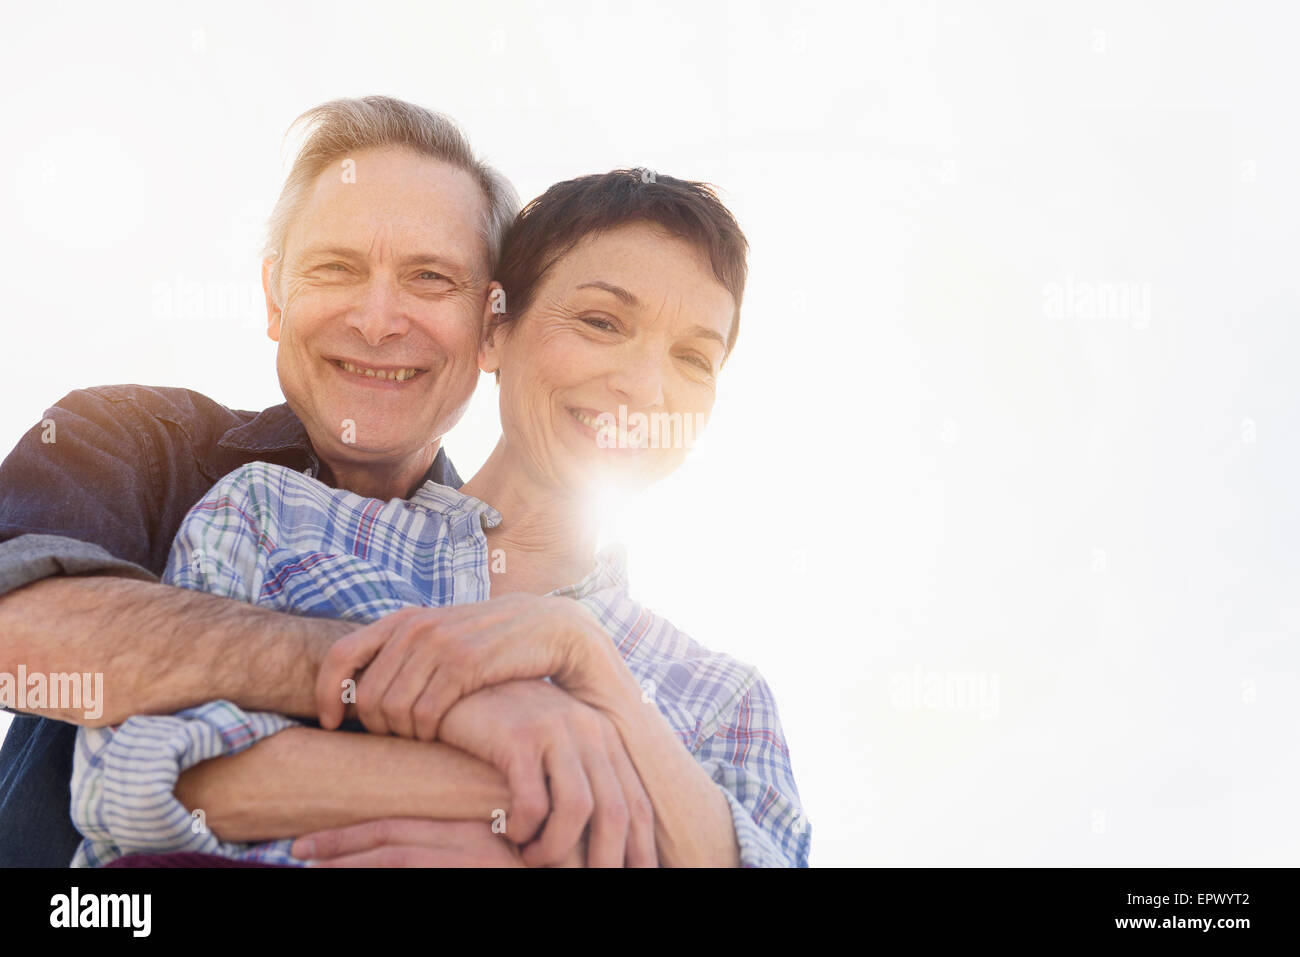 Portrait of smiling senior couple embracing in sunlight Stock Photo